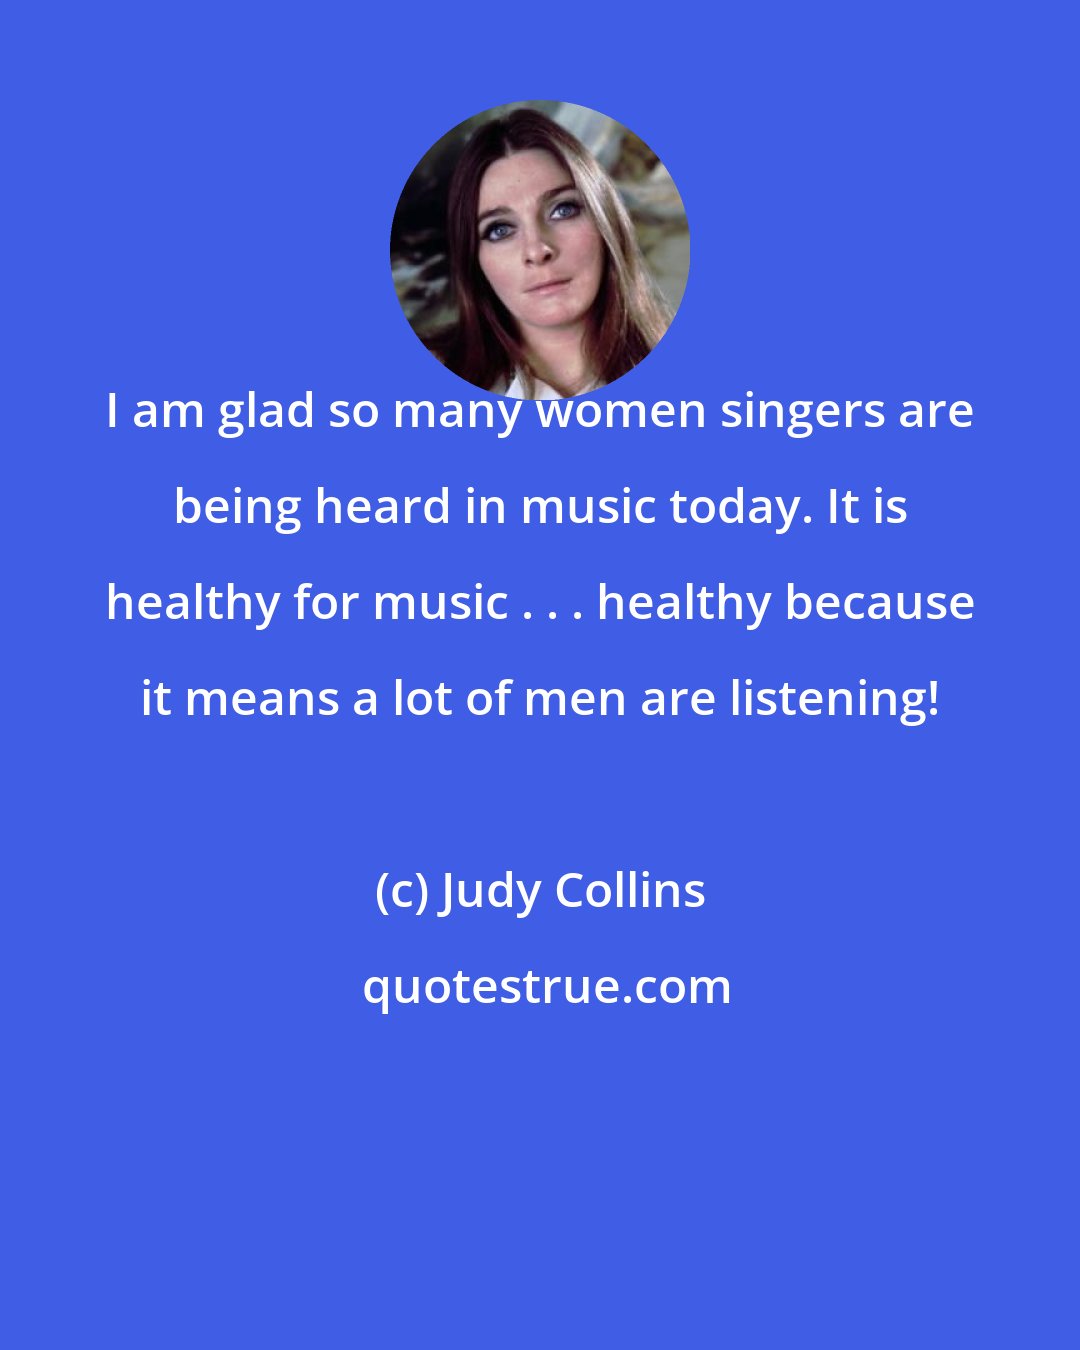 Judy Collins: I am glad so many women singers are being heard in music today. It is healthy for music . . . healthy because it means a lot of men are listening!